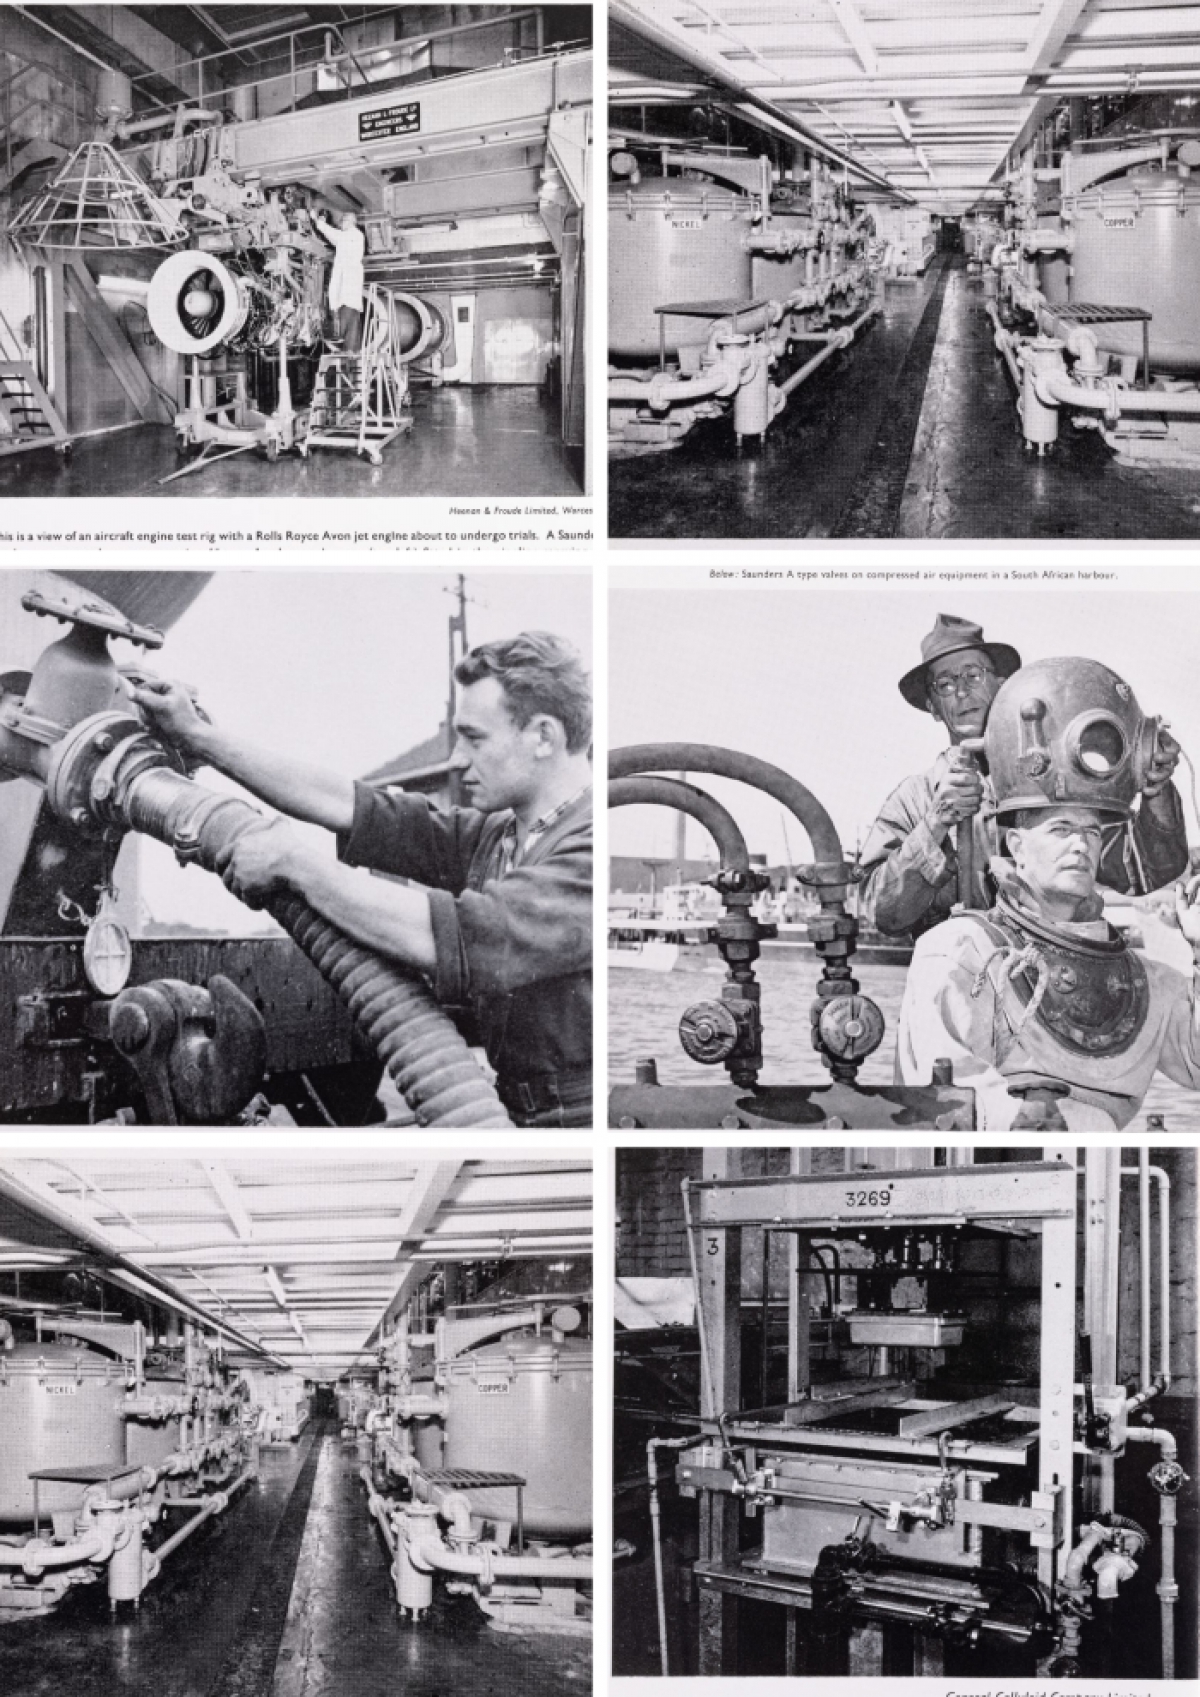 Solving Customers Toughest Challenges since 1928 - Rolls Royce Avon Jet Engine (first image), thermoplastics, food processing, chemical process, pharma, among others�